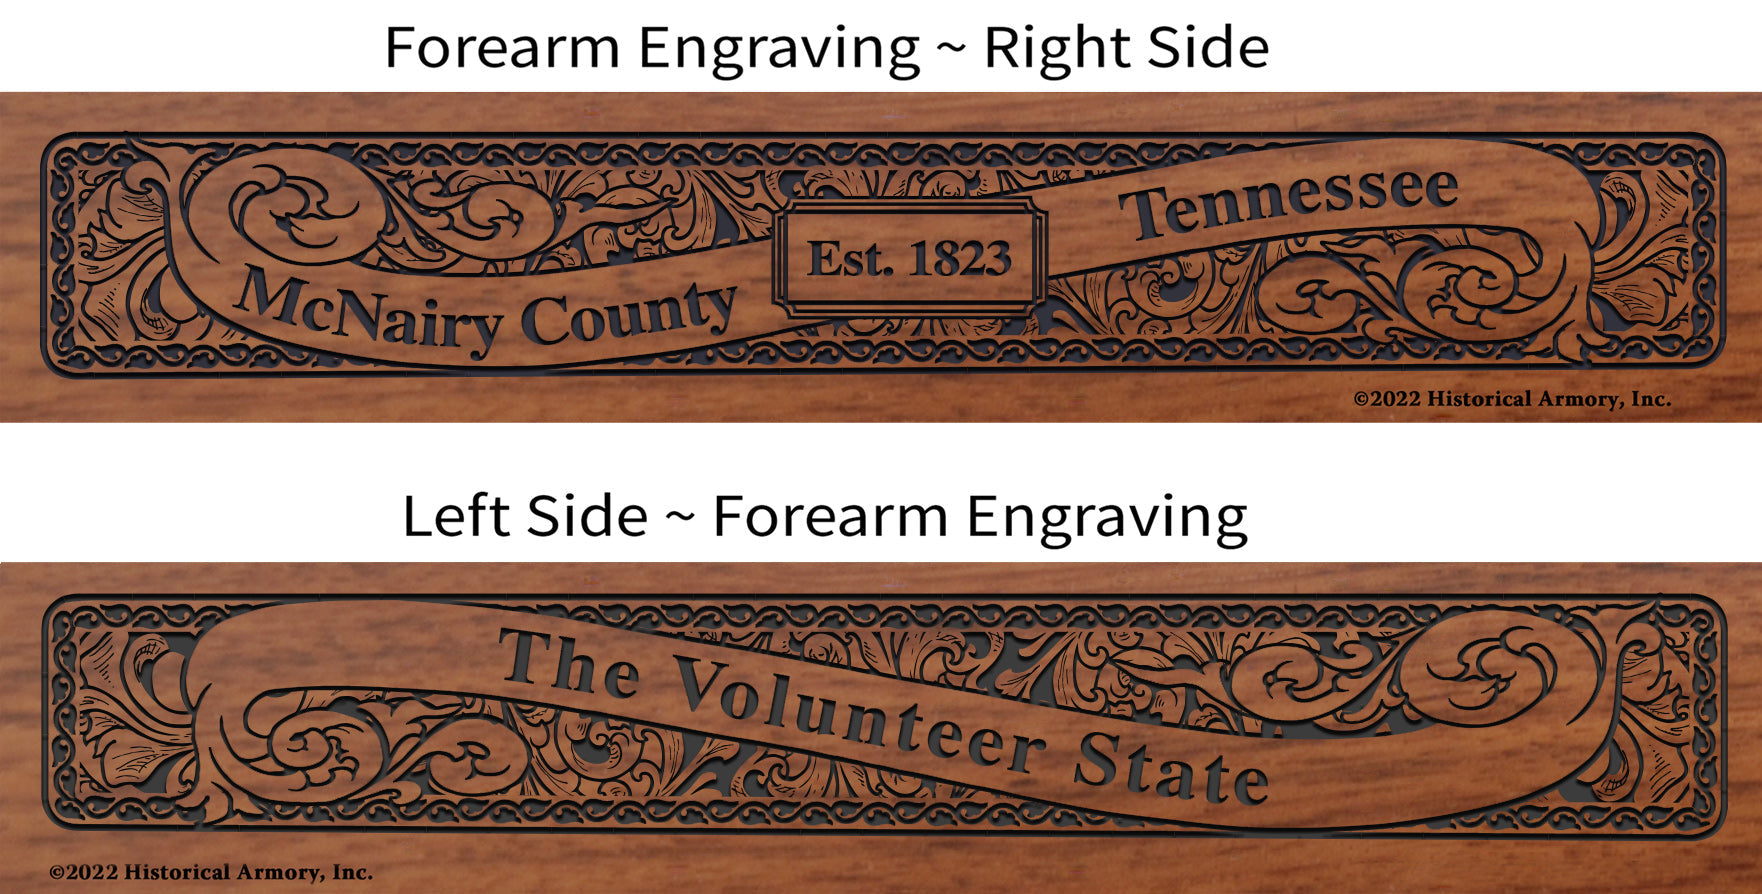 McNairy County Tennessee Engraved Rifle Forearm